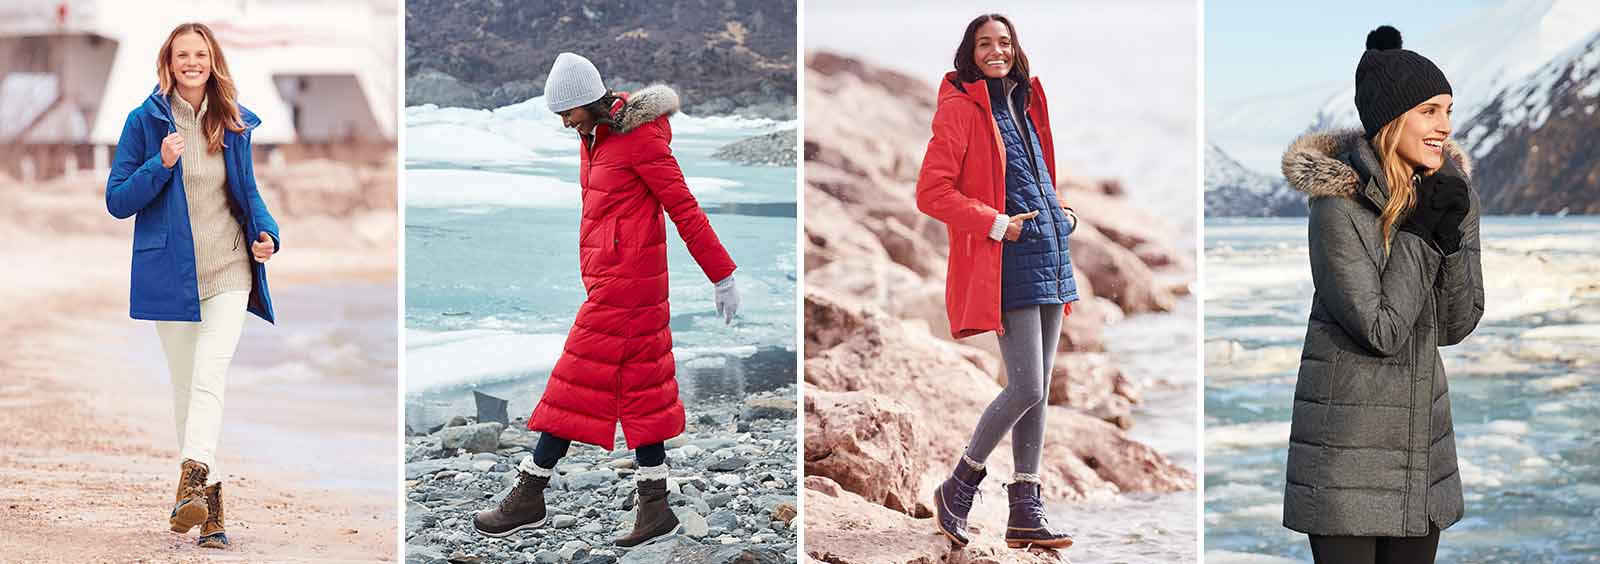 The 8 Best Winter Jackets for Women of 2023 | Tested by GearLab